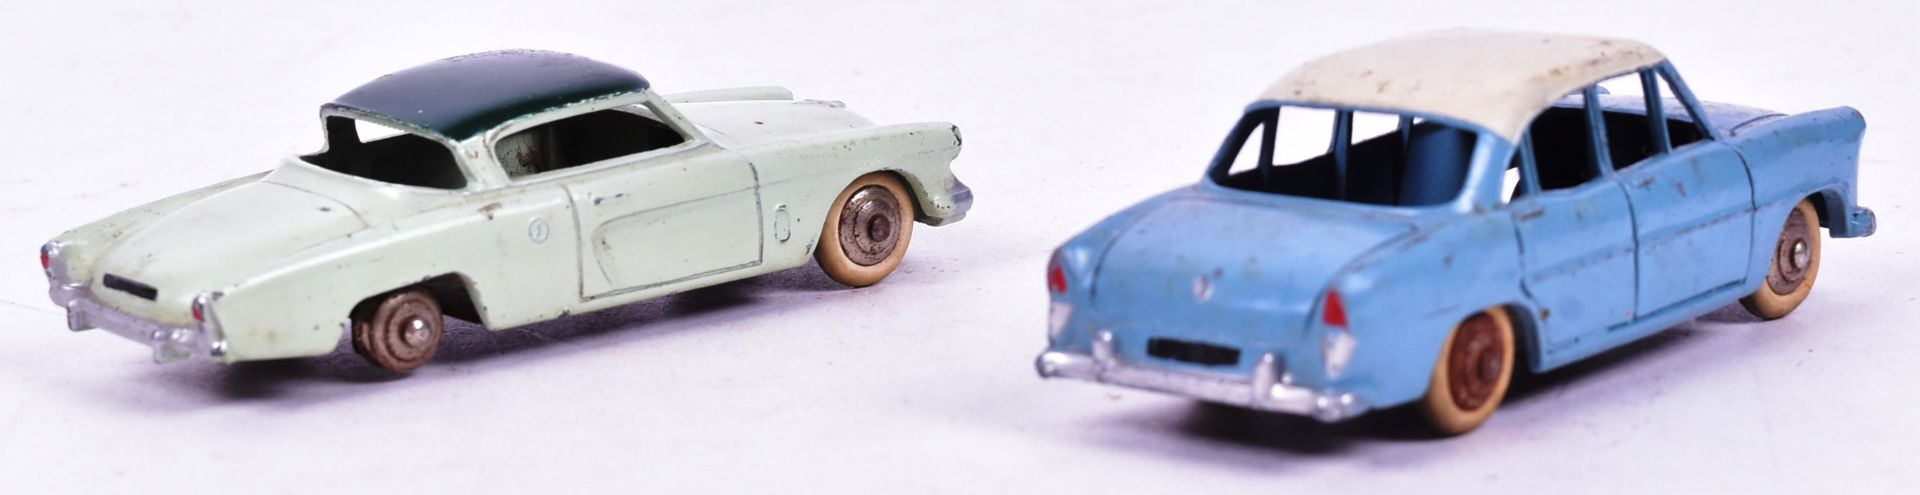 DIECAST - FRENCH DINKY TOYS - SIMCA VERSAILLES & STUDEBAKER COMMANDER - Image 4 of 6